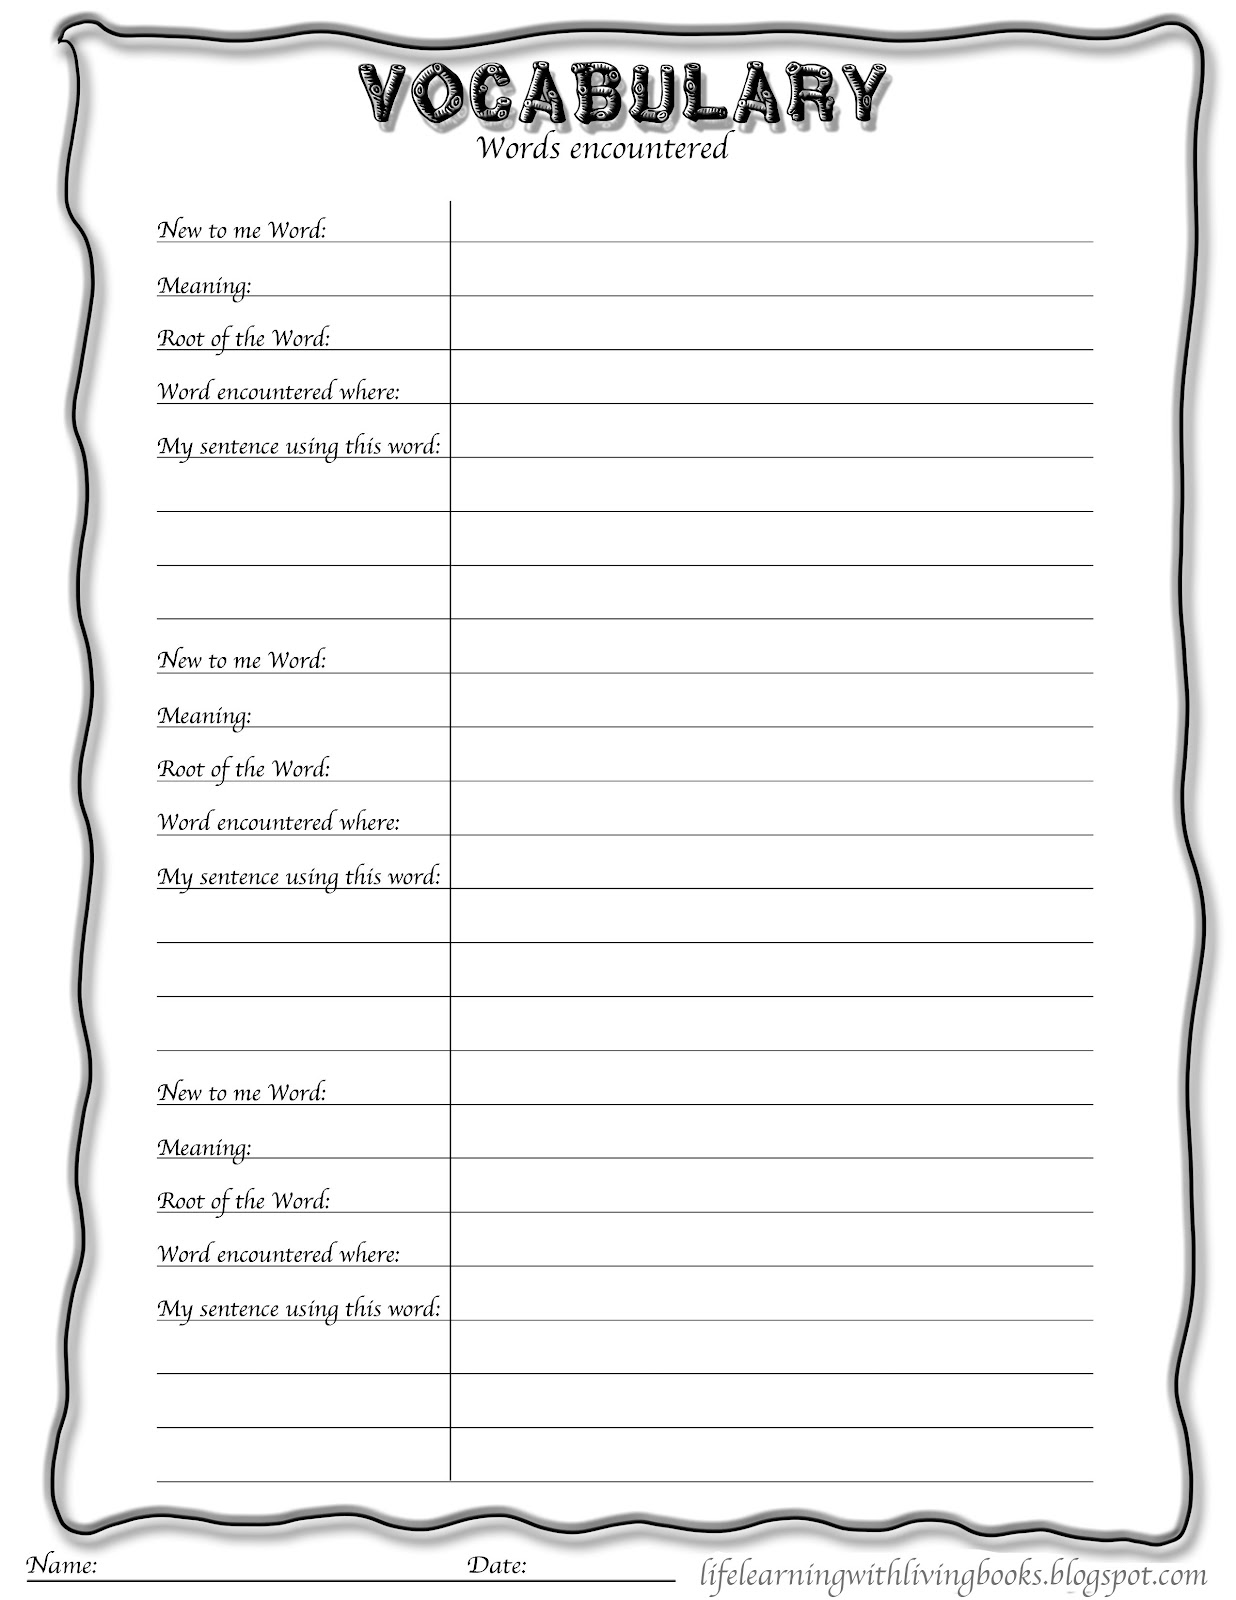 vocabulary-worksheet-template-free-printable-templates